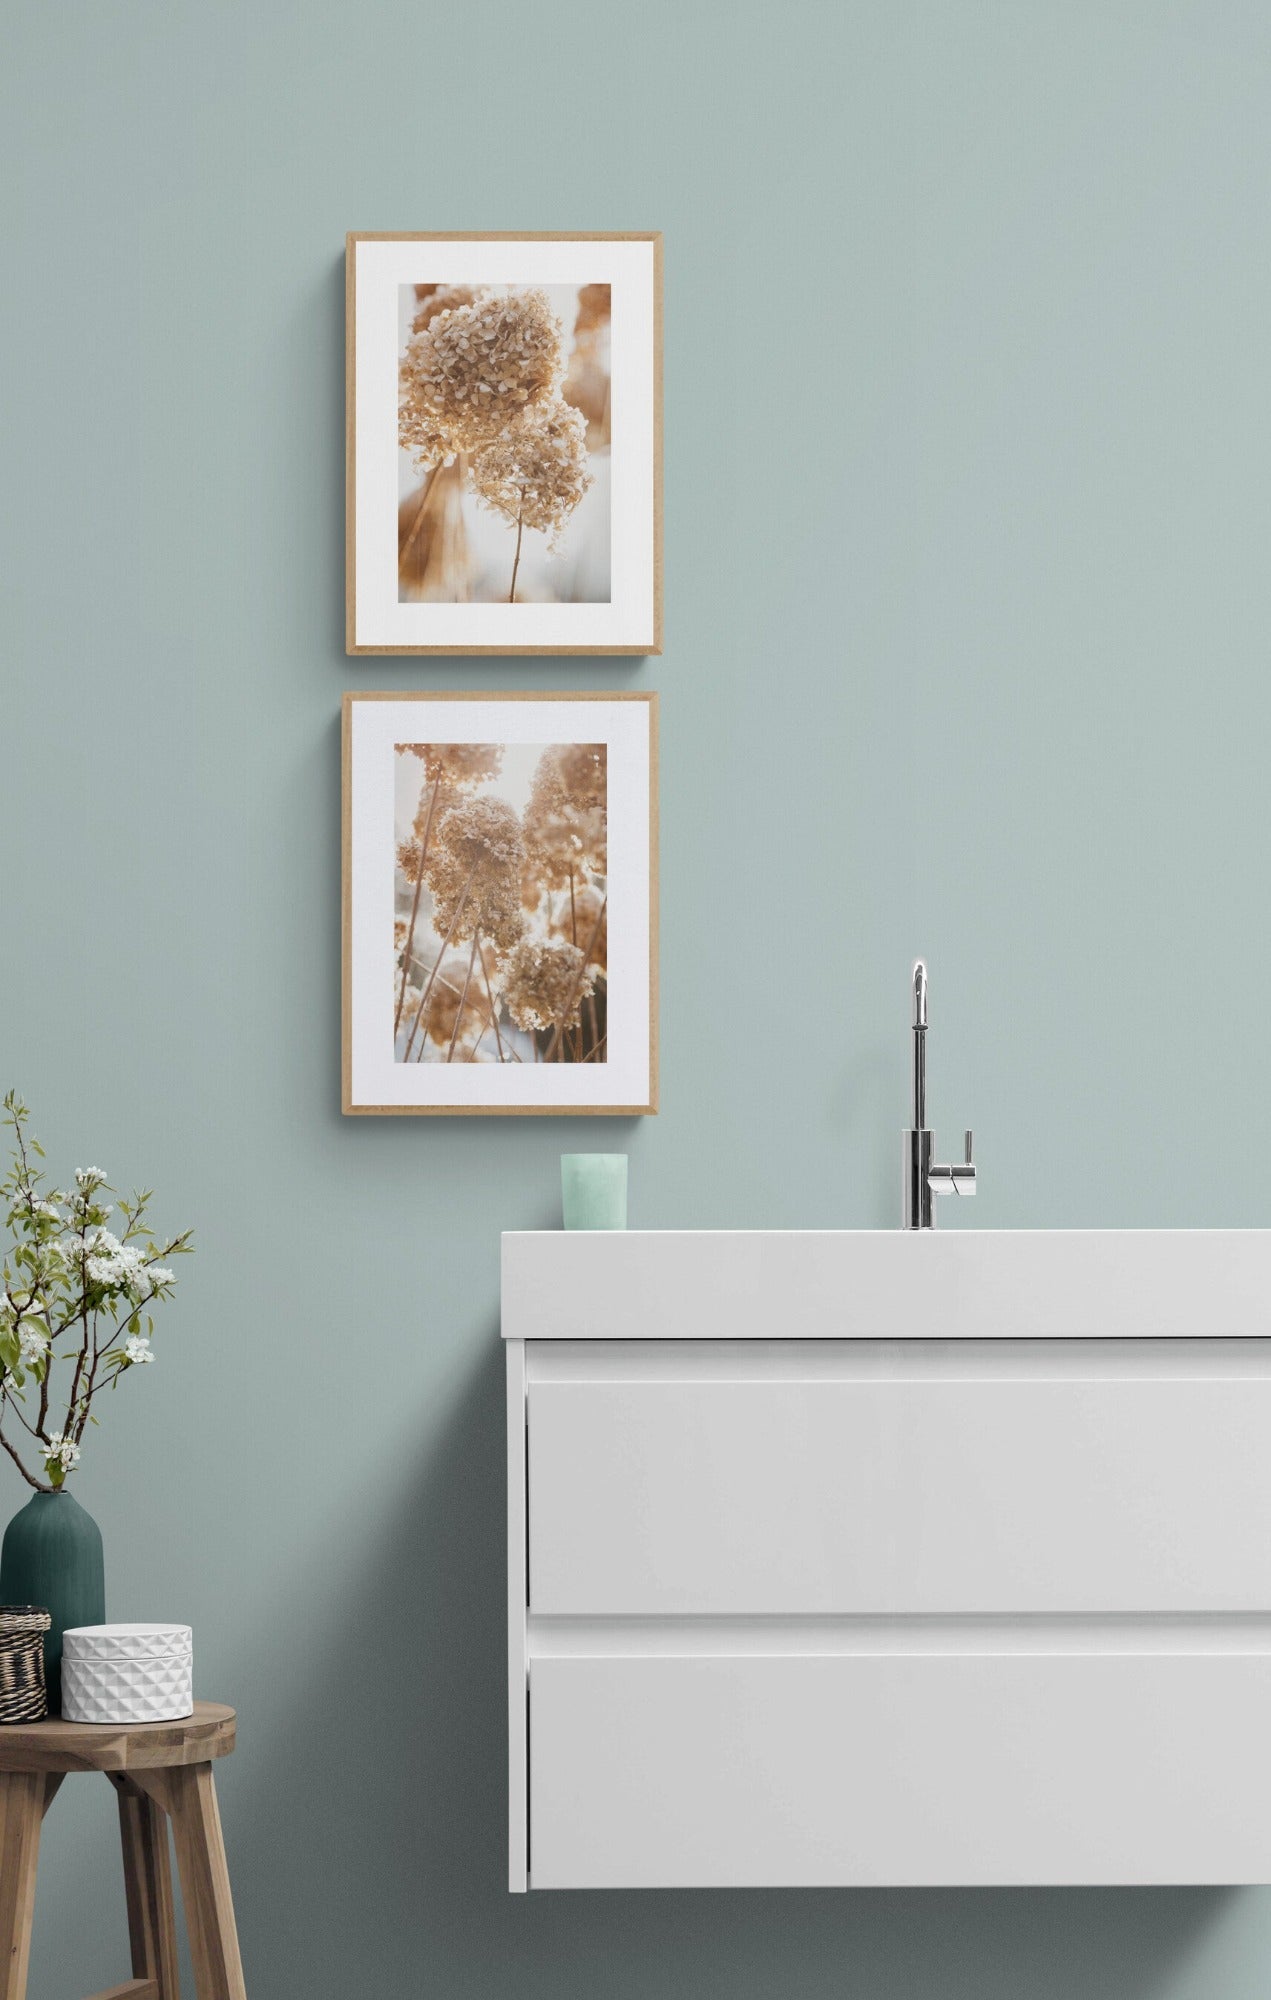 Set of two wall art photographs of winter hydrangeas in a bathroom